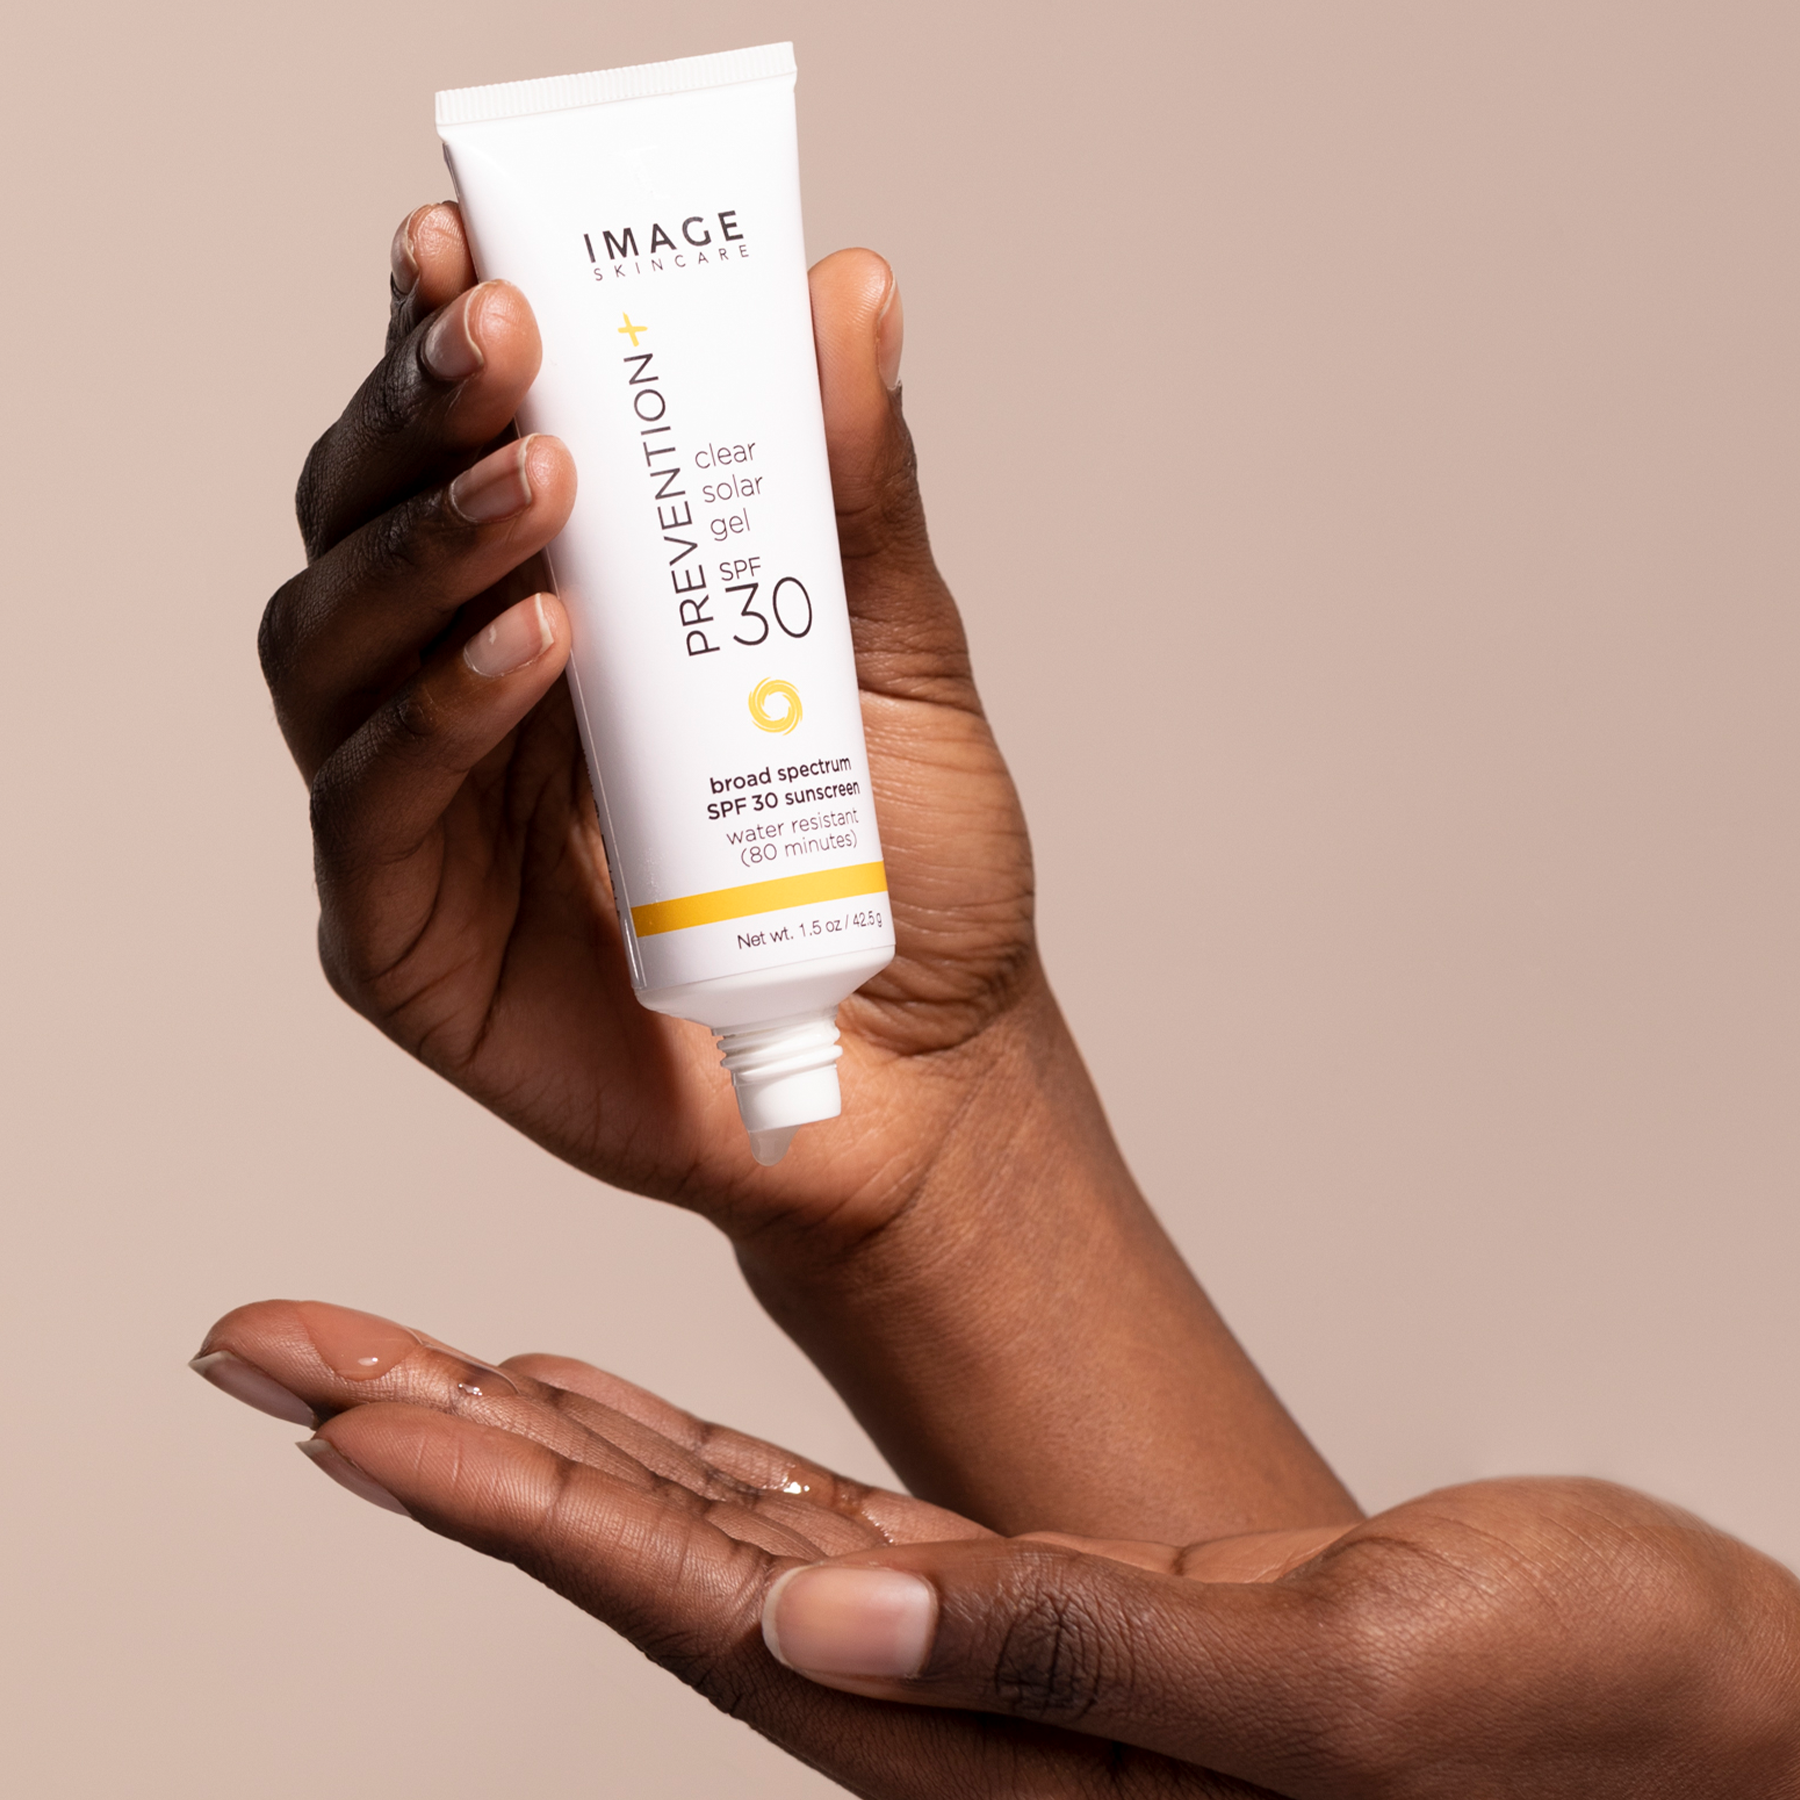 A hand holding the award-winning PREVENTION+ clear sola gel SPF 30 sunscreen.